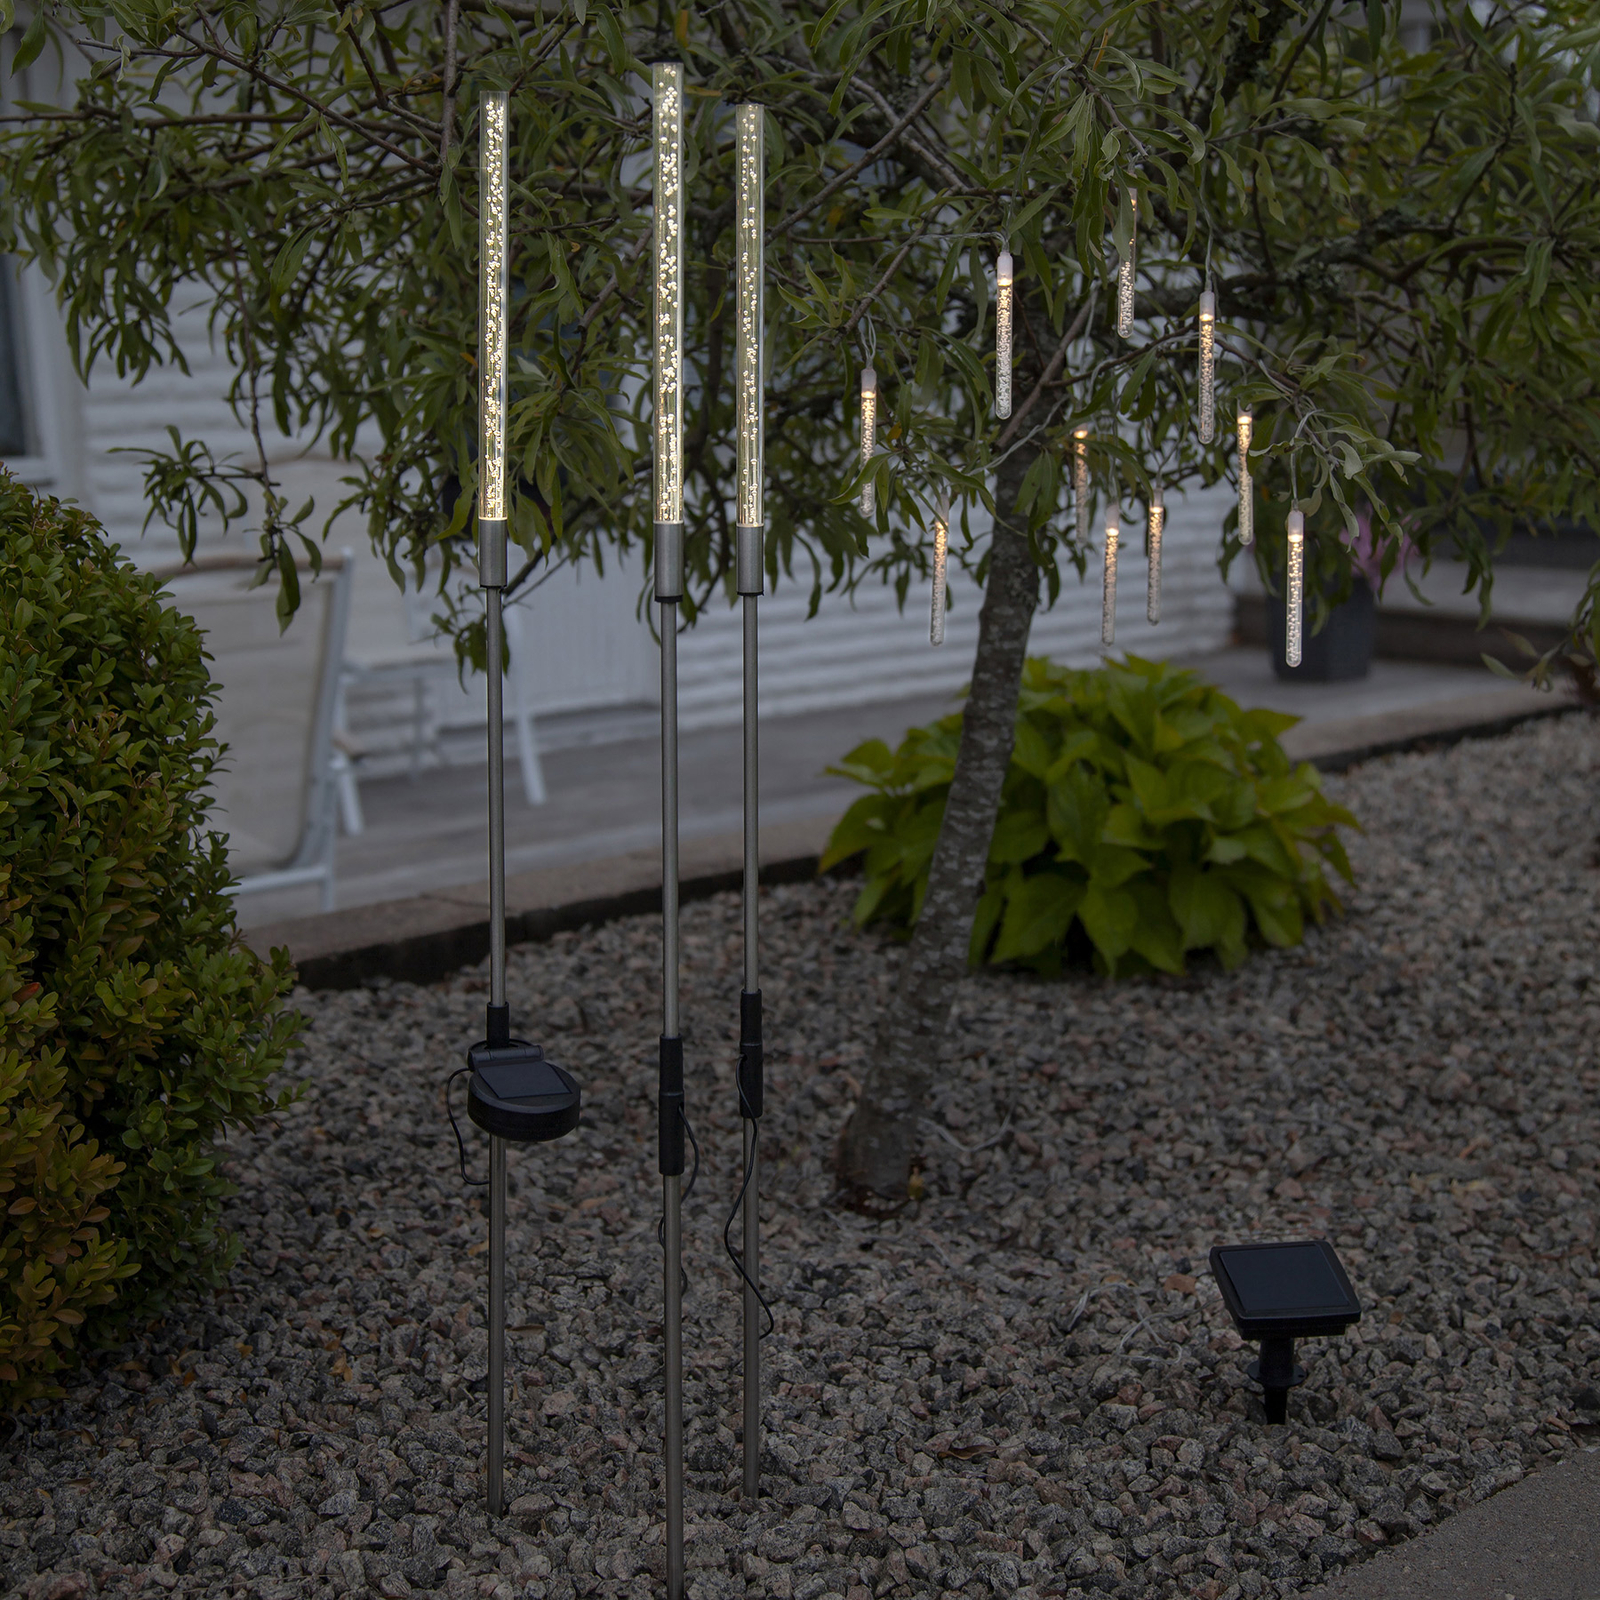 Bubbly LED solar light in a set of 3, warm white